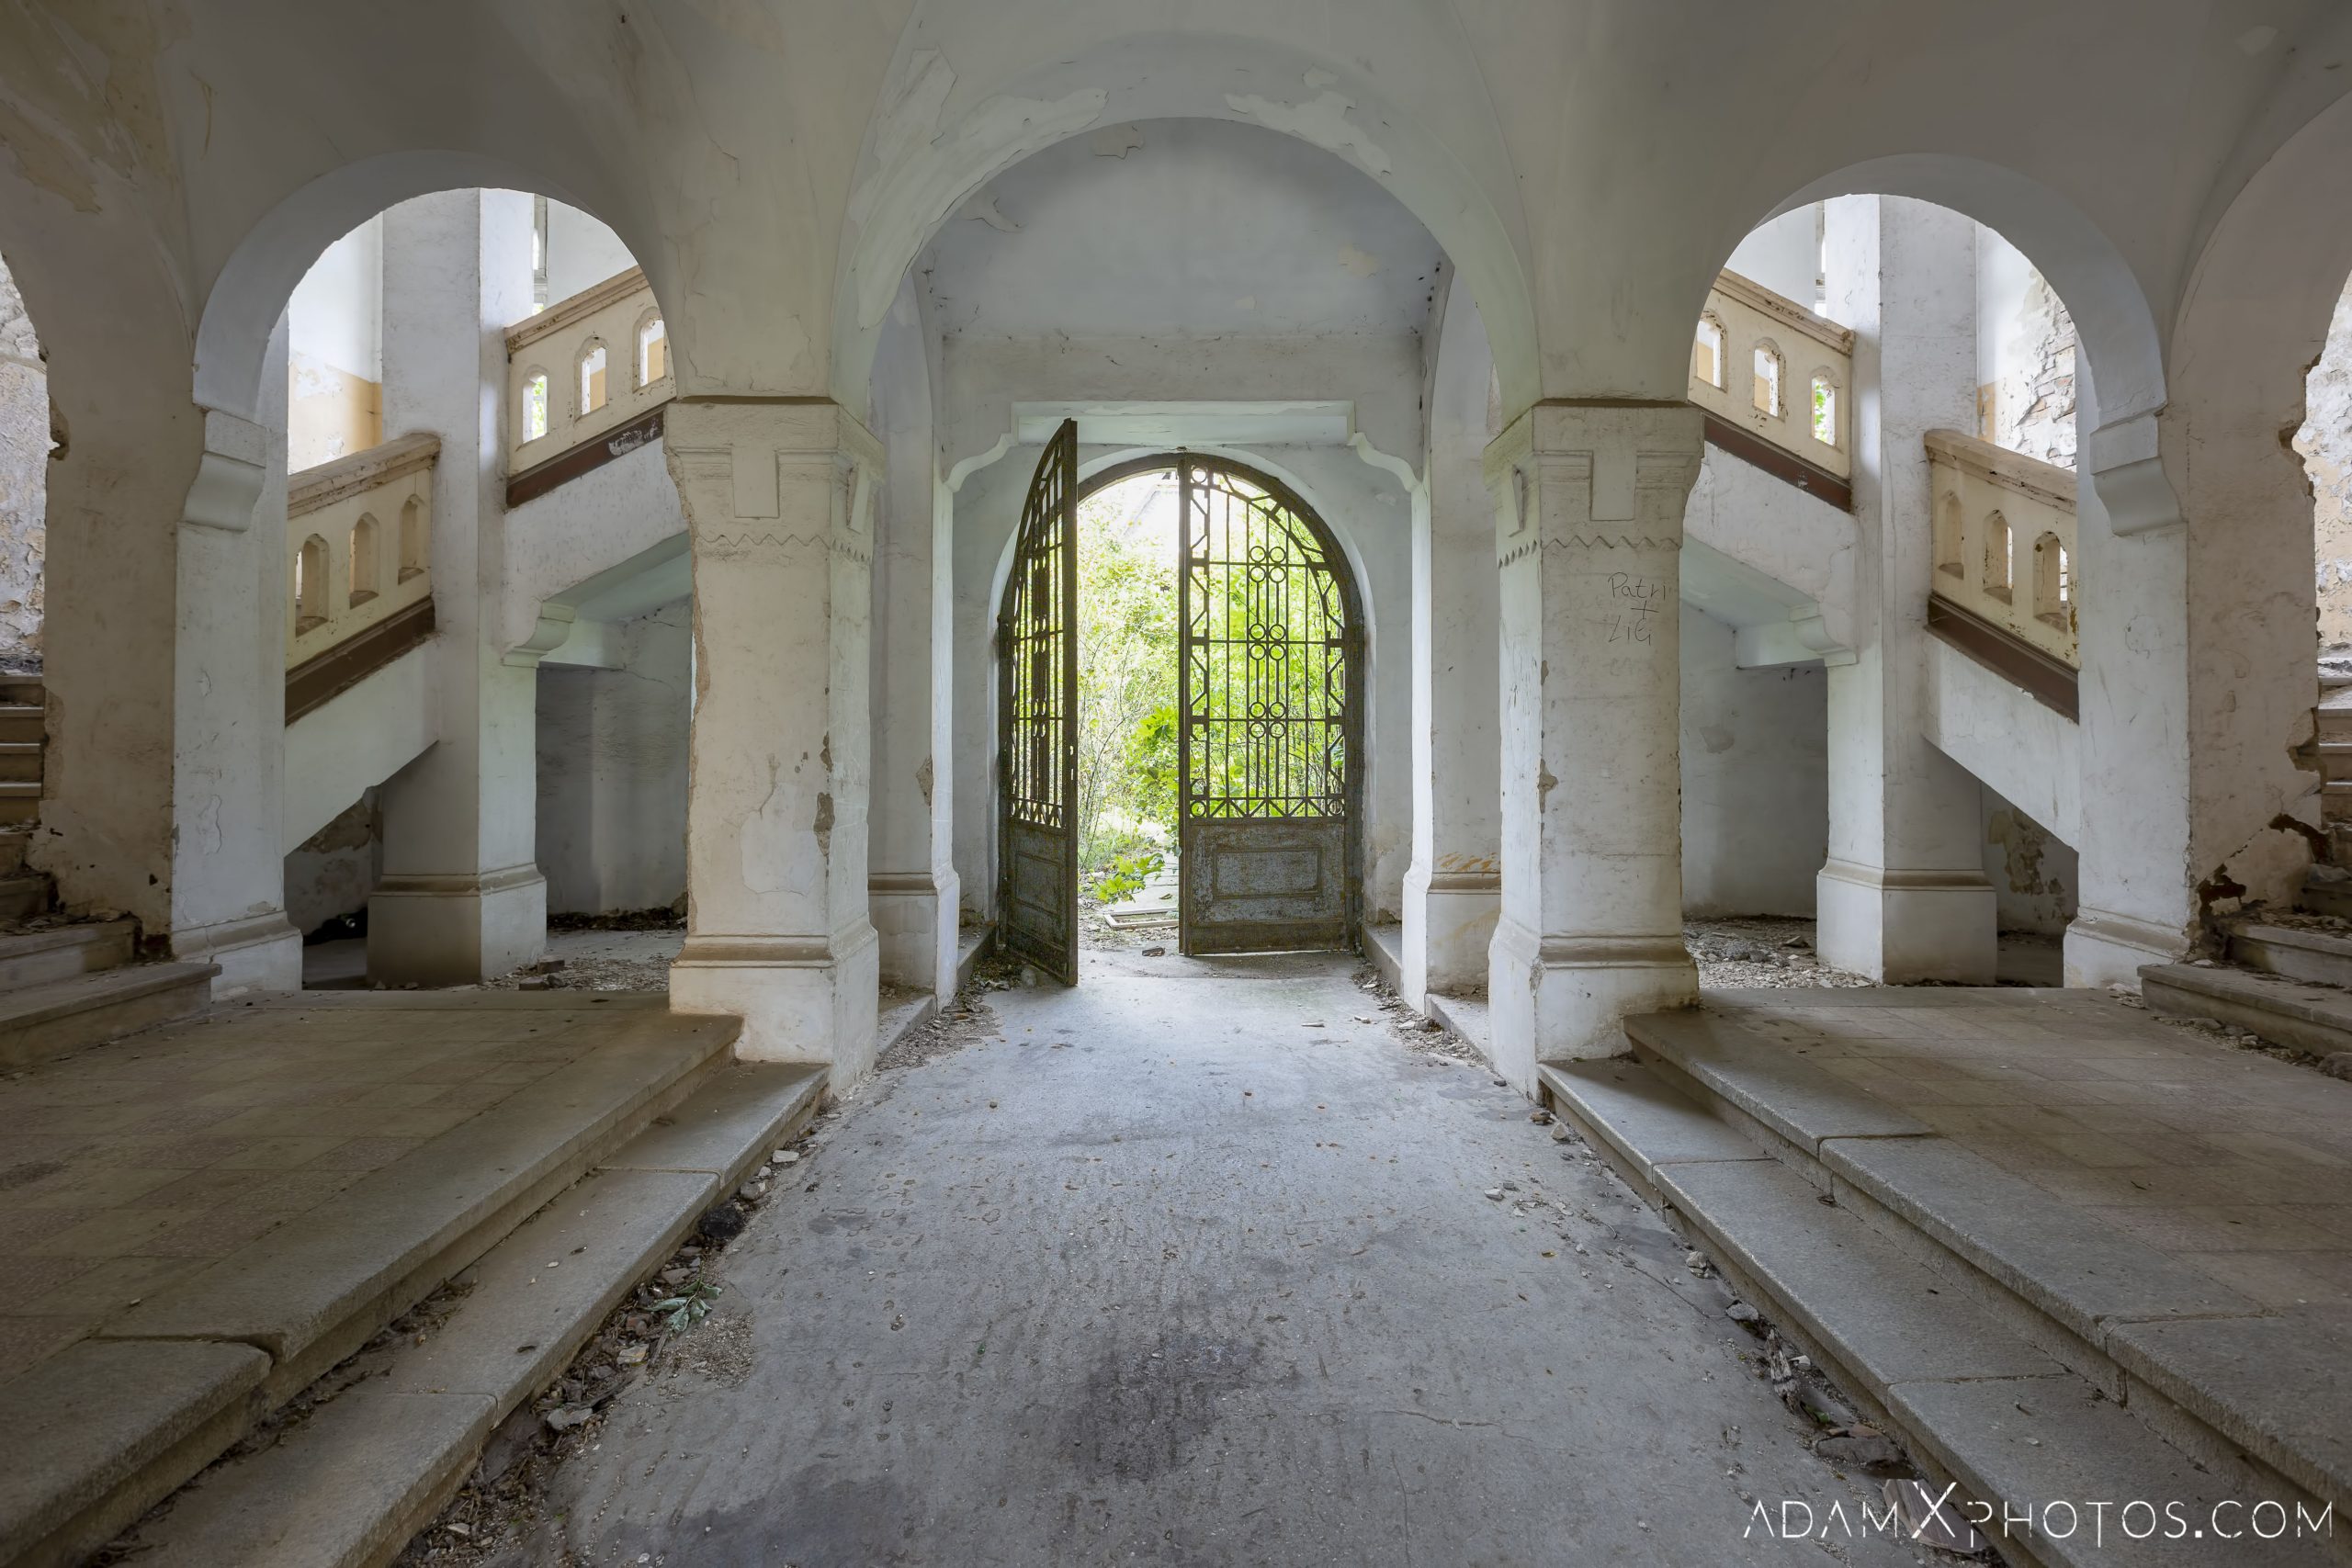 Hajmaskér Barracks Hungary Courtyard entrance gate stairs Adam X Urbex Urban Exploration Access 2018 Abandoned decay ruins lost forgotten derelict location creepy haunting eerie